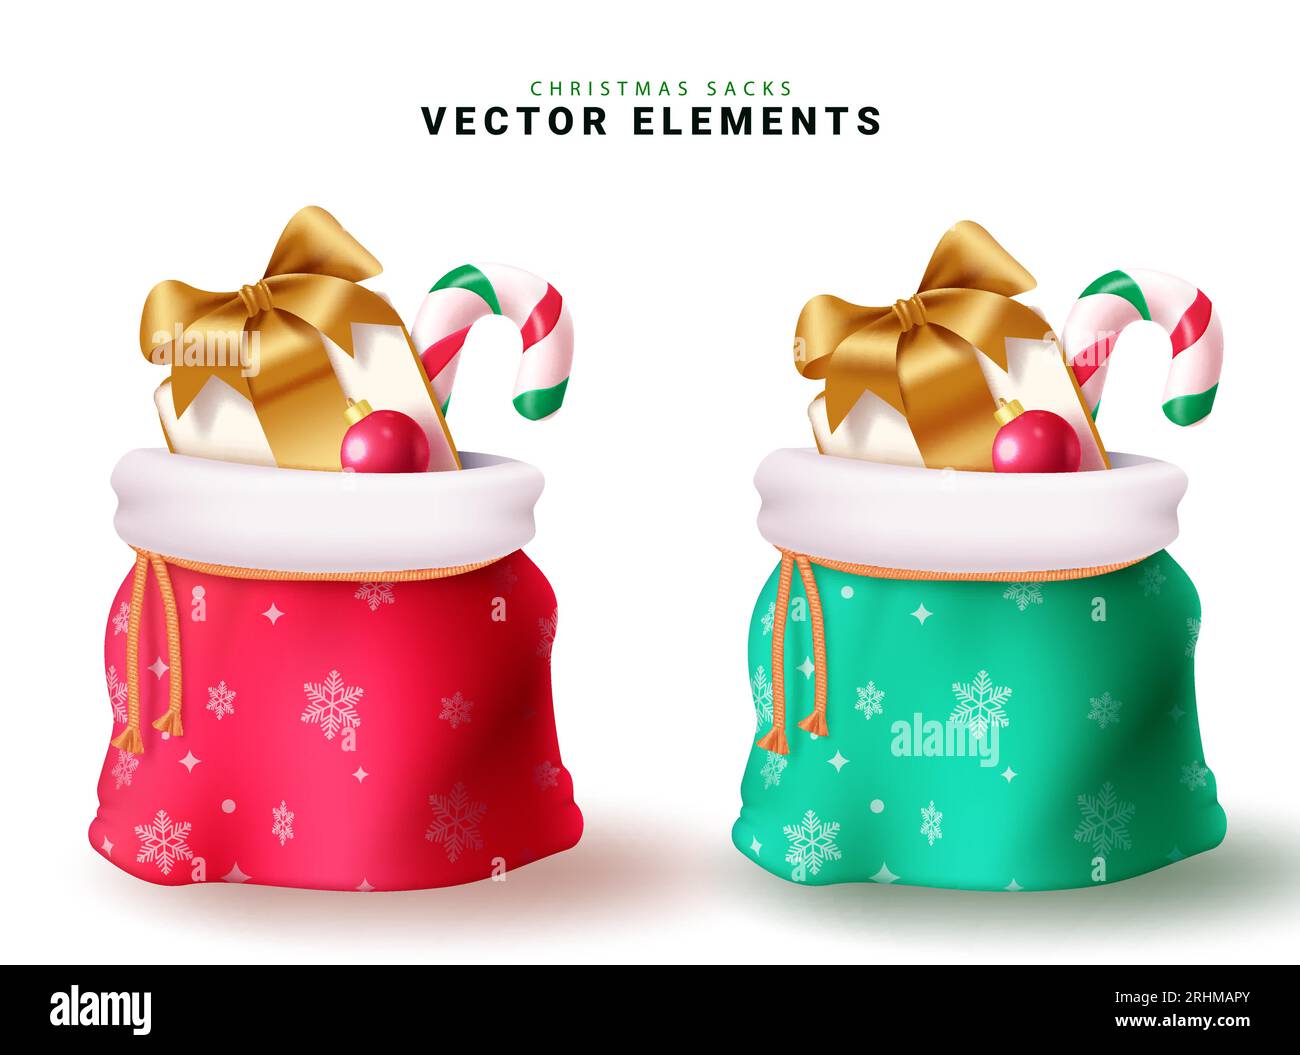 Christmas sacks elements set vector design. Christmas sack collection for holiday season gift giving present and surprise elements. Vector Stock Vector